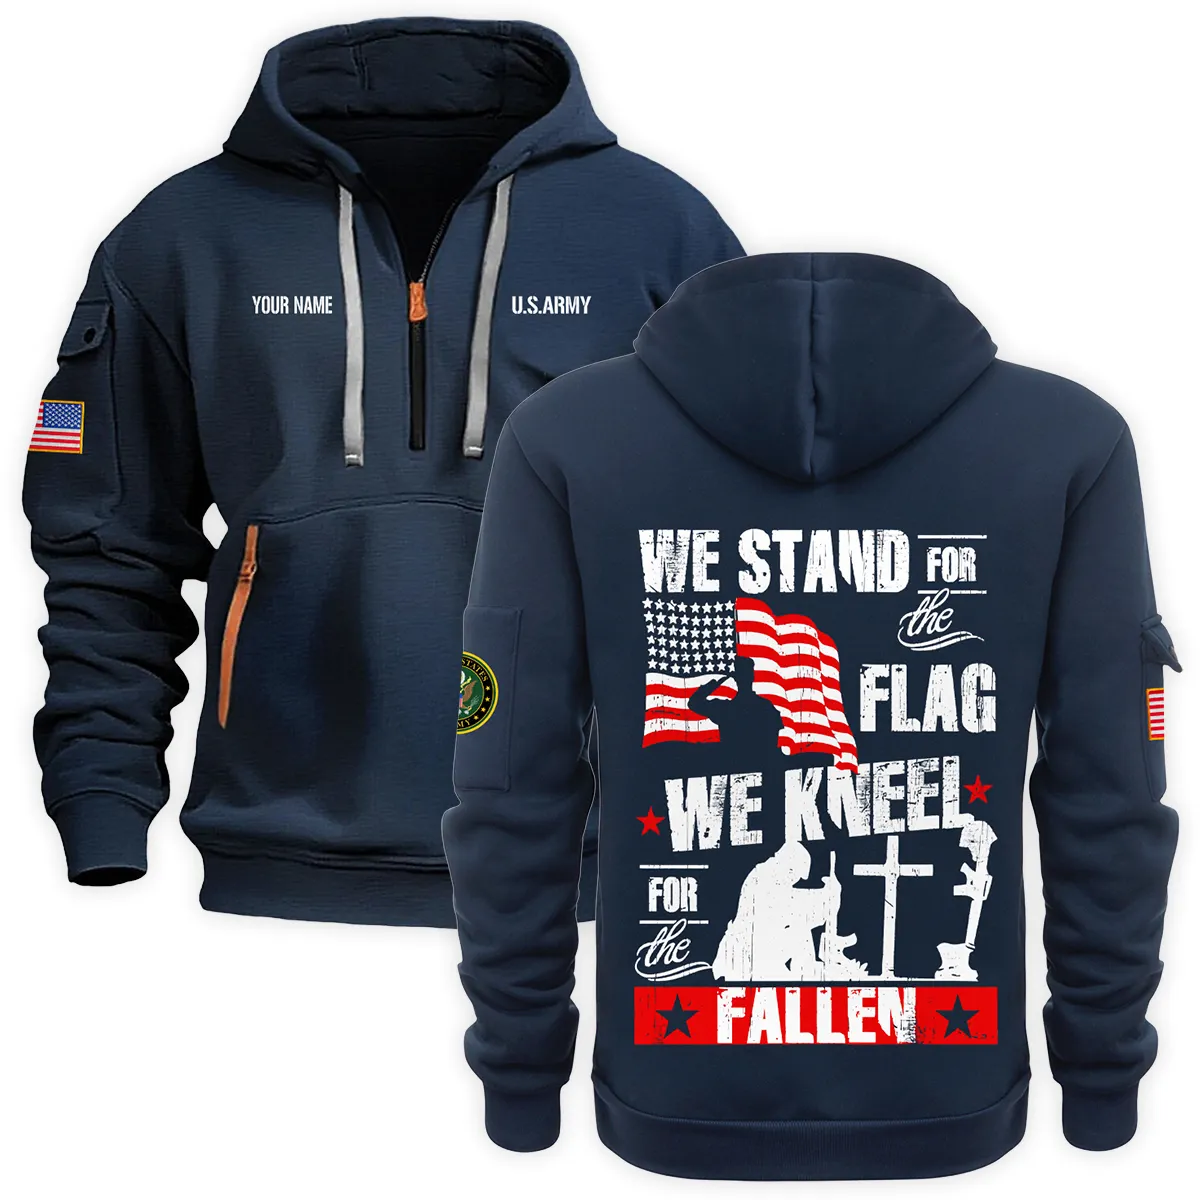 Personalized Name We Stand For The Flag U.S. Army Veteran Hoodie Half Zipper Quarter Hoodie